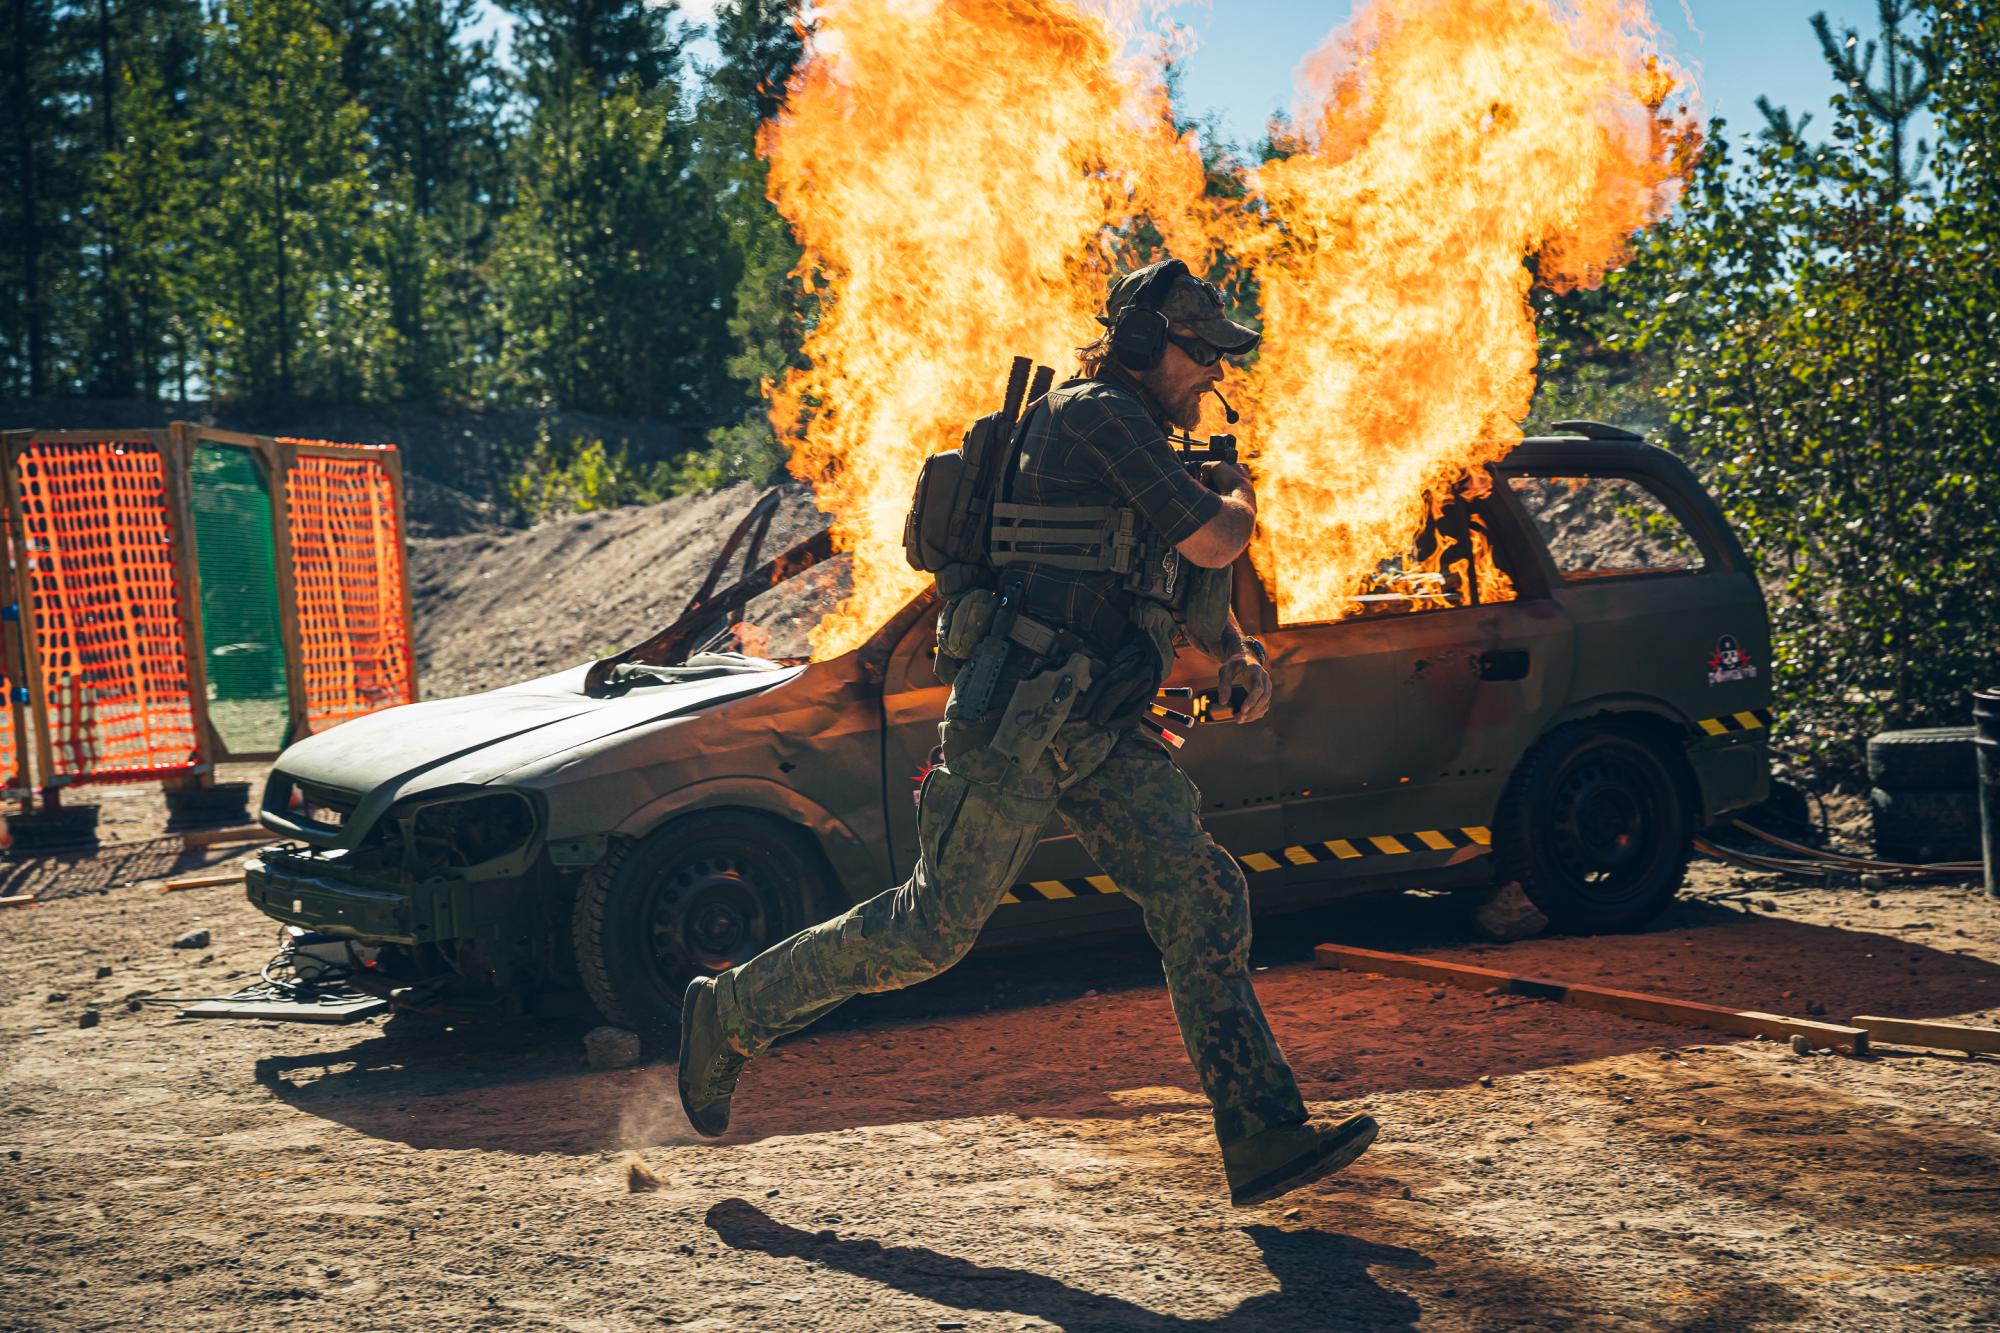 A man running in front of a burning car.